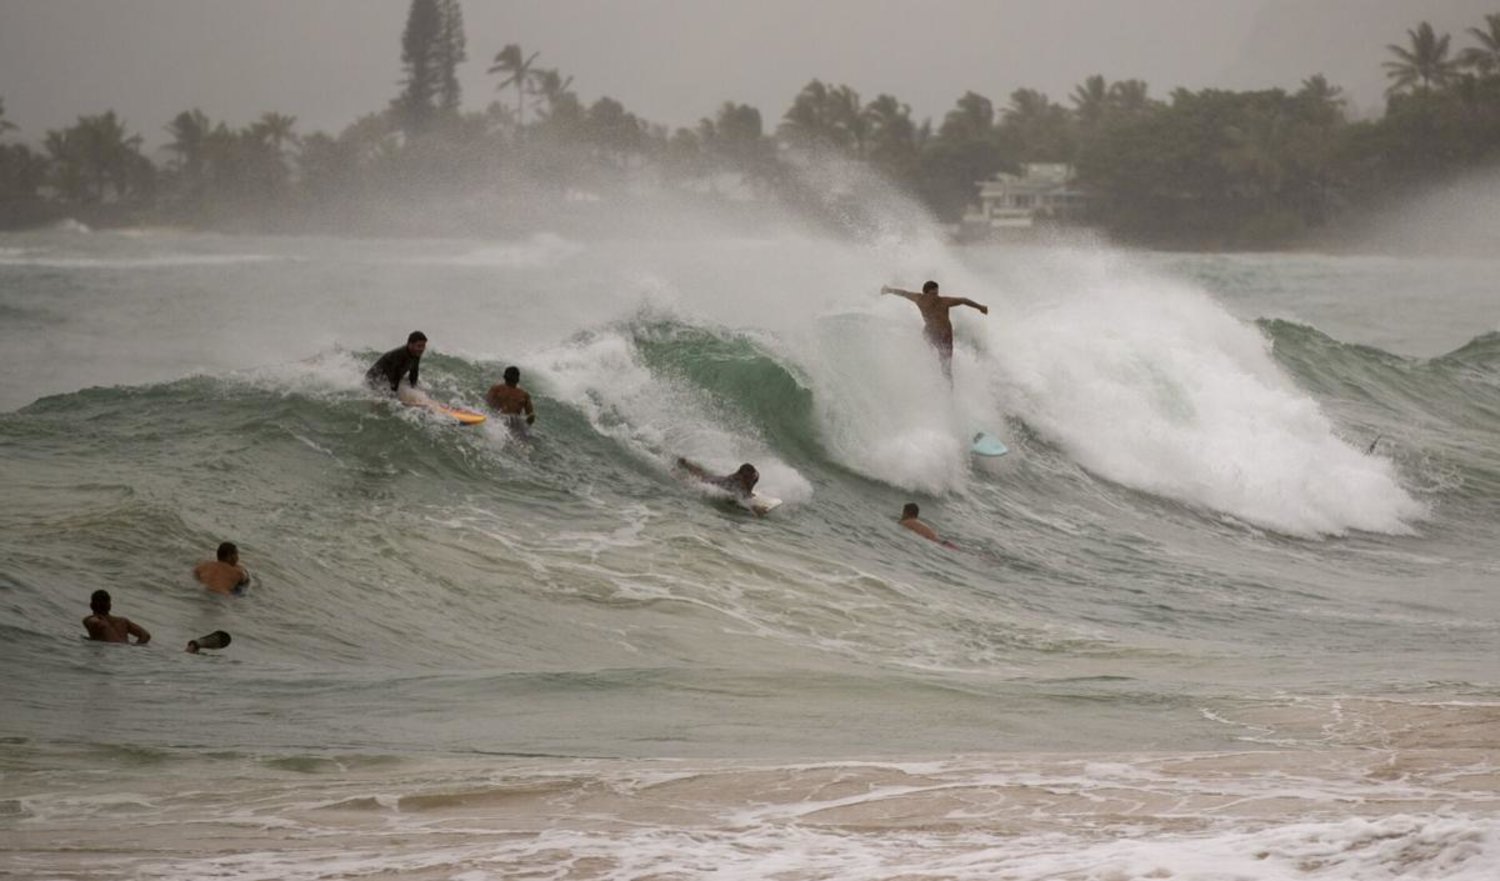 Surfers take on large waves generated by Hurricane Douglas at Laie Beach Park, Sunday, July 26, 2020, in Laie, Hawaii. (AP Photo/Eugene Tanner)